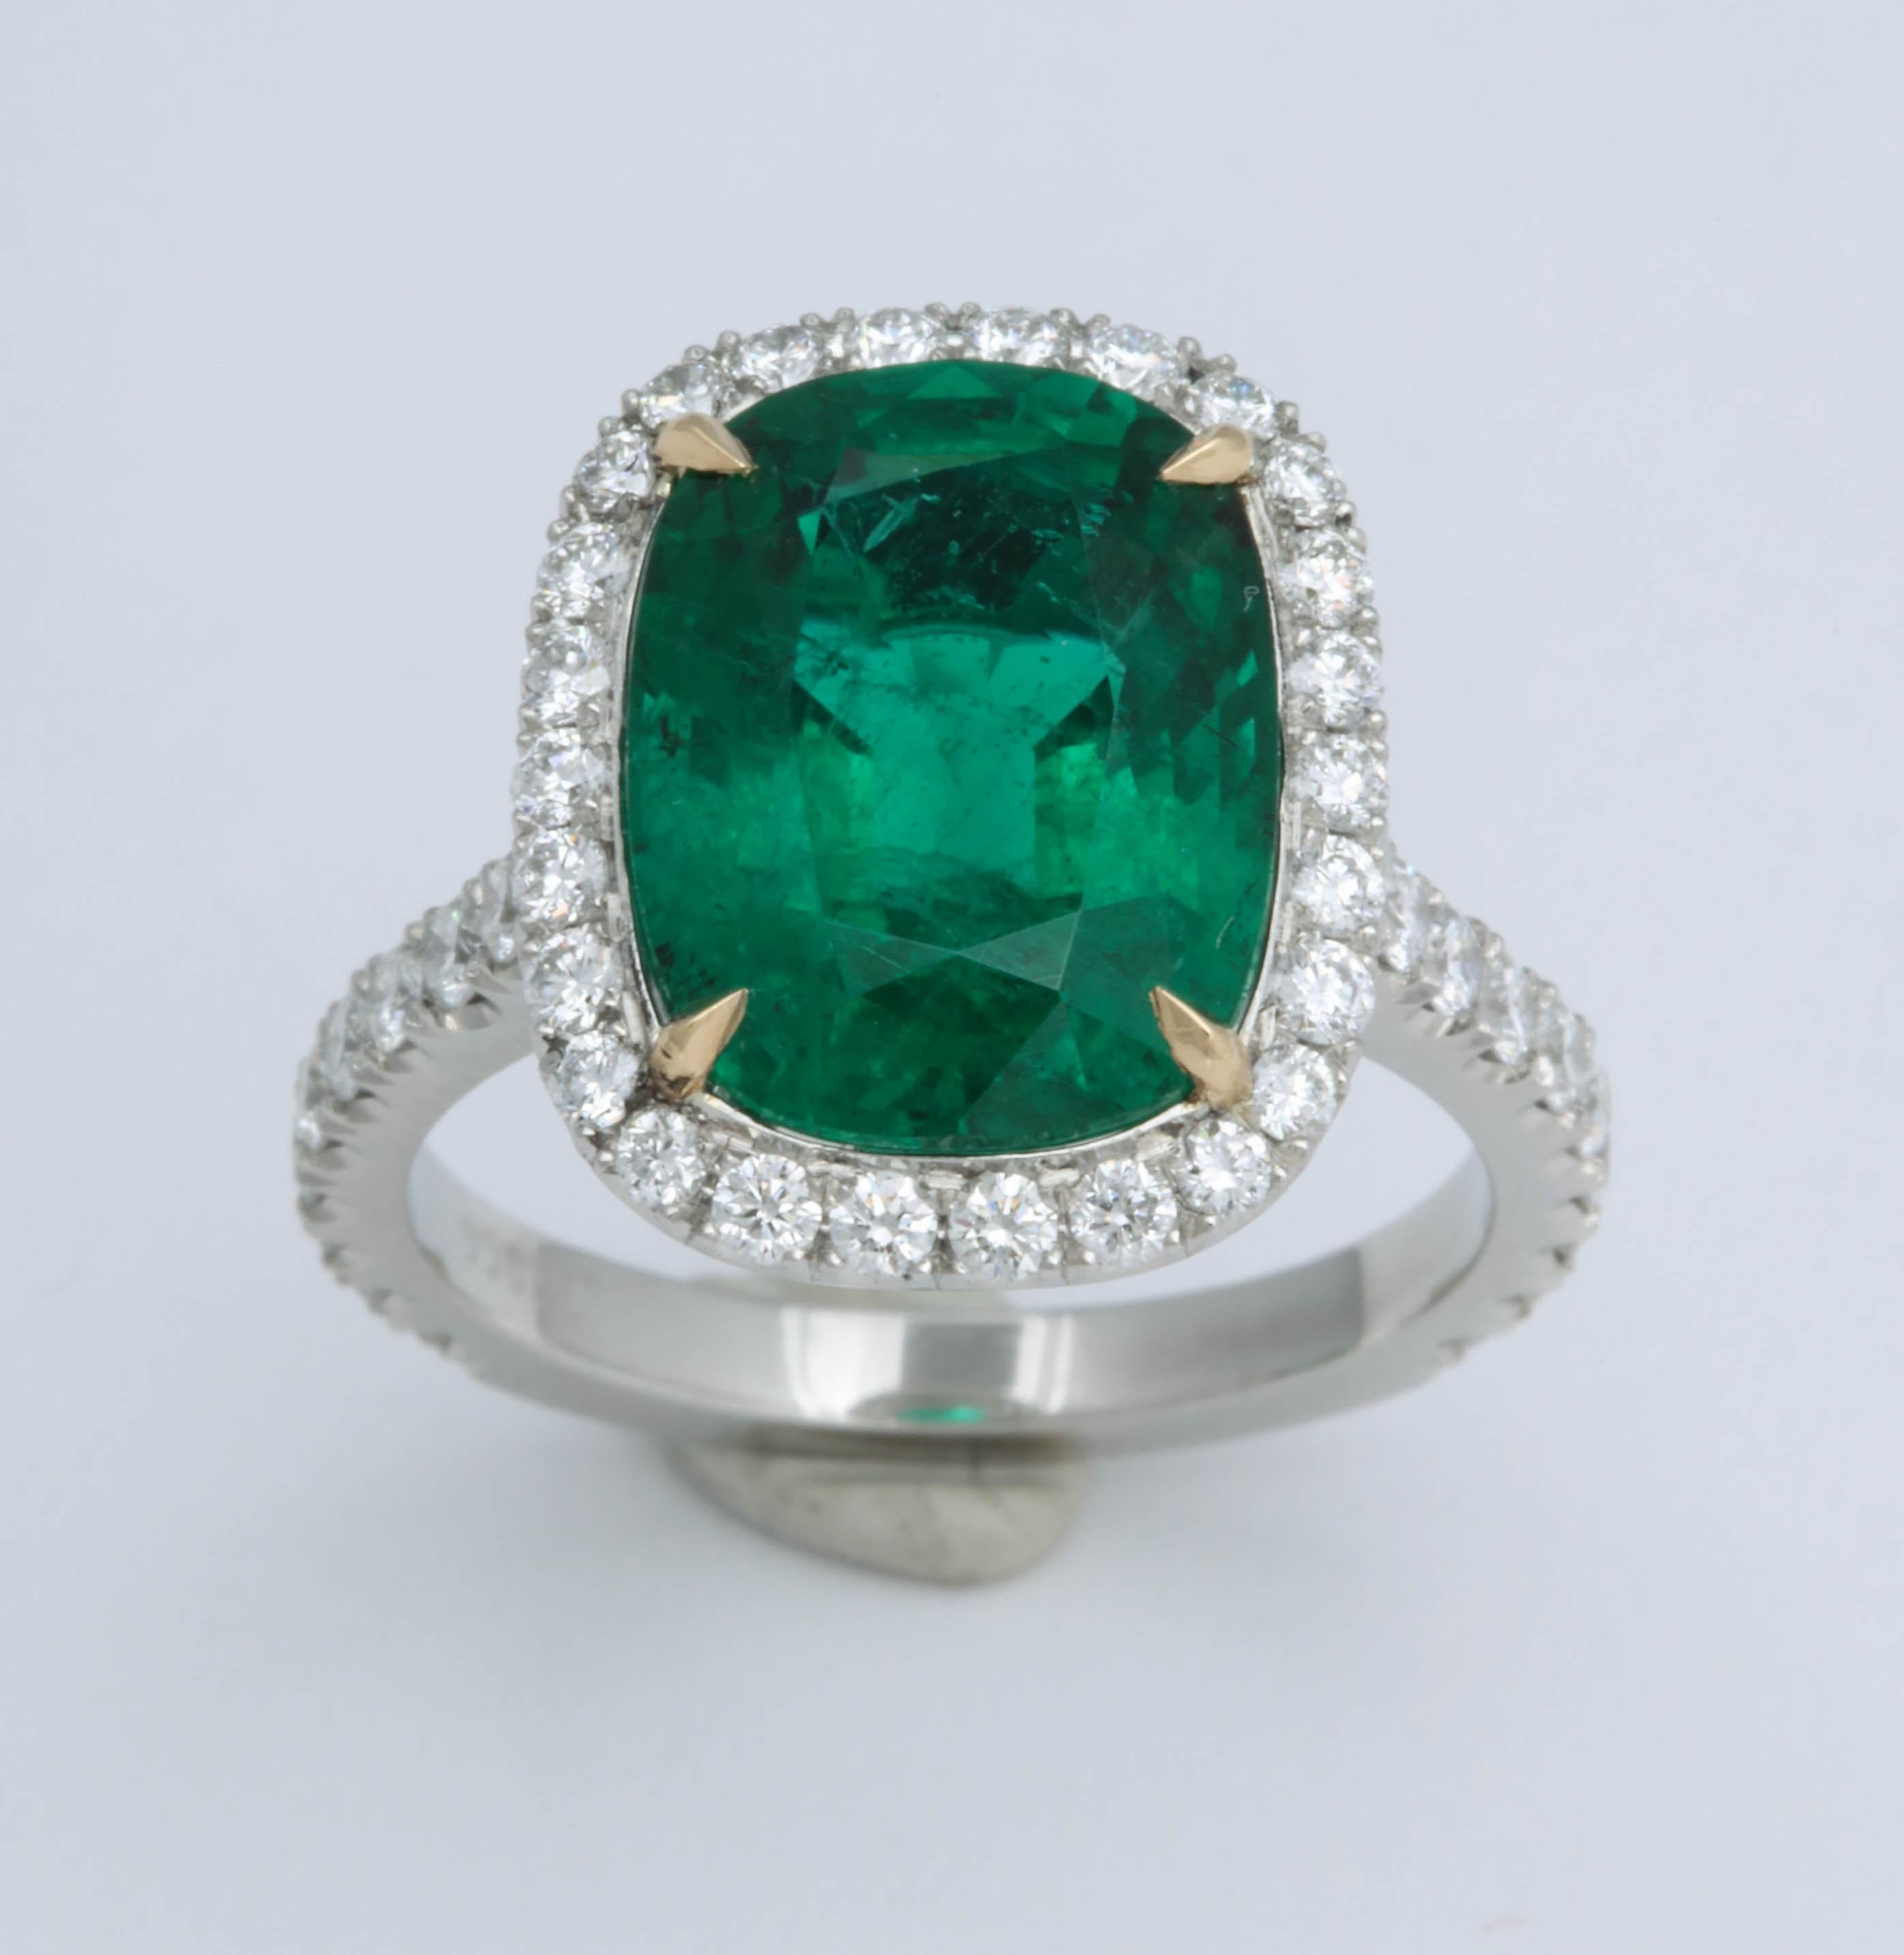 5 Carat Green Emerald Cushion Cut Diamond Halo Ring GIA Certified No Oil In New Condition For Sale In New York, NY